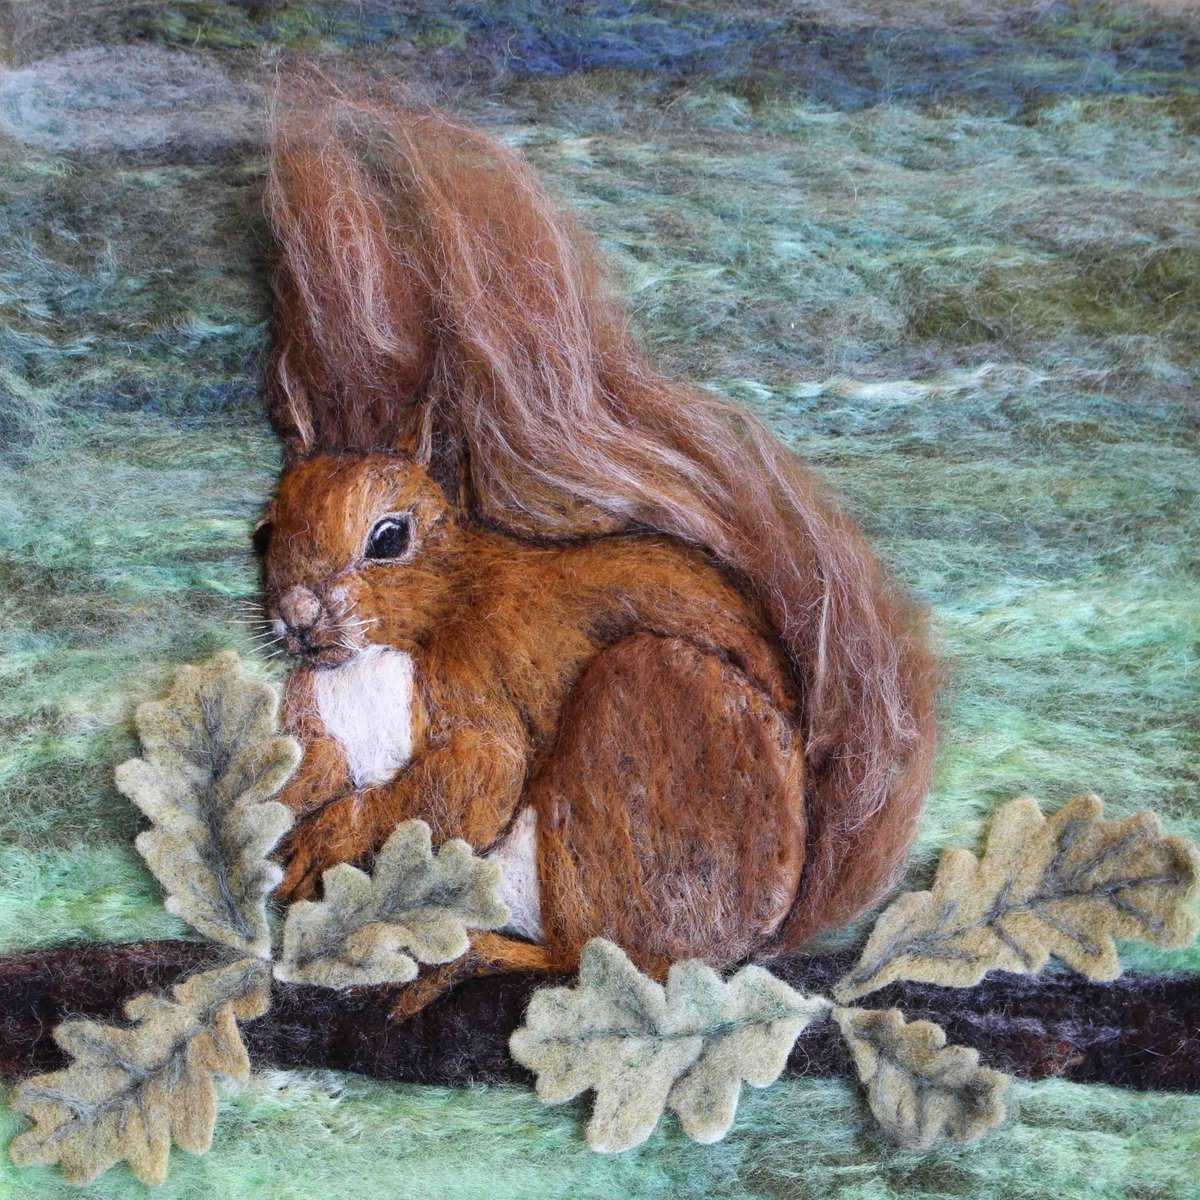 I will be demonstrating needle felting at the #fortyfarmsfair @rheged on Saturday. Come and say 'hello' and see how I create my animal portraits. I will have greetings cards and coasters too. #lakedistrictartist #britishnativebreeds @Campaignforwool @BritishWool